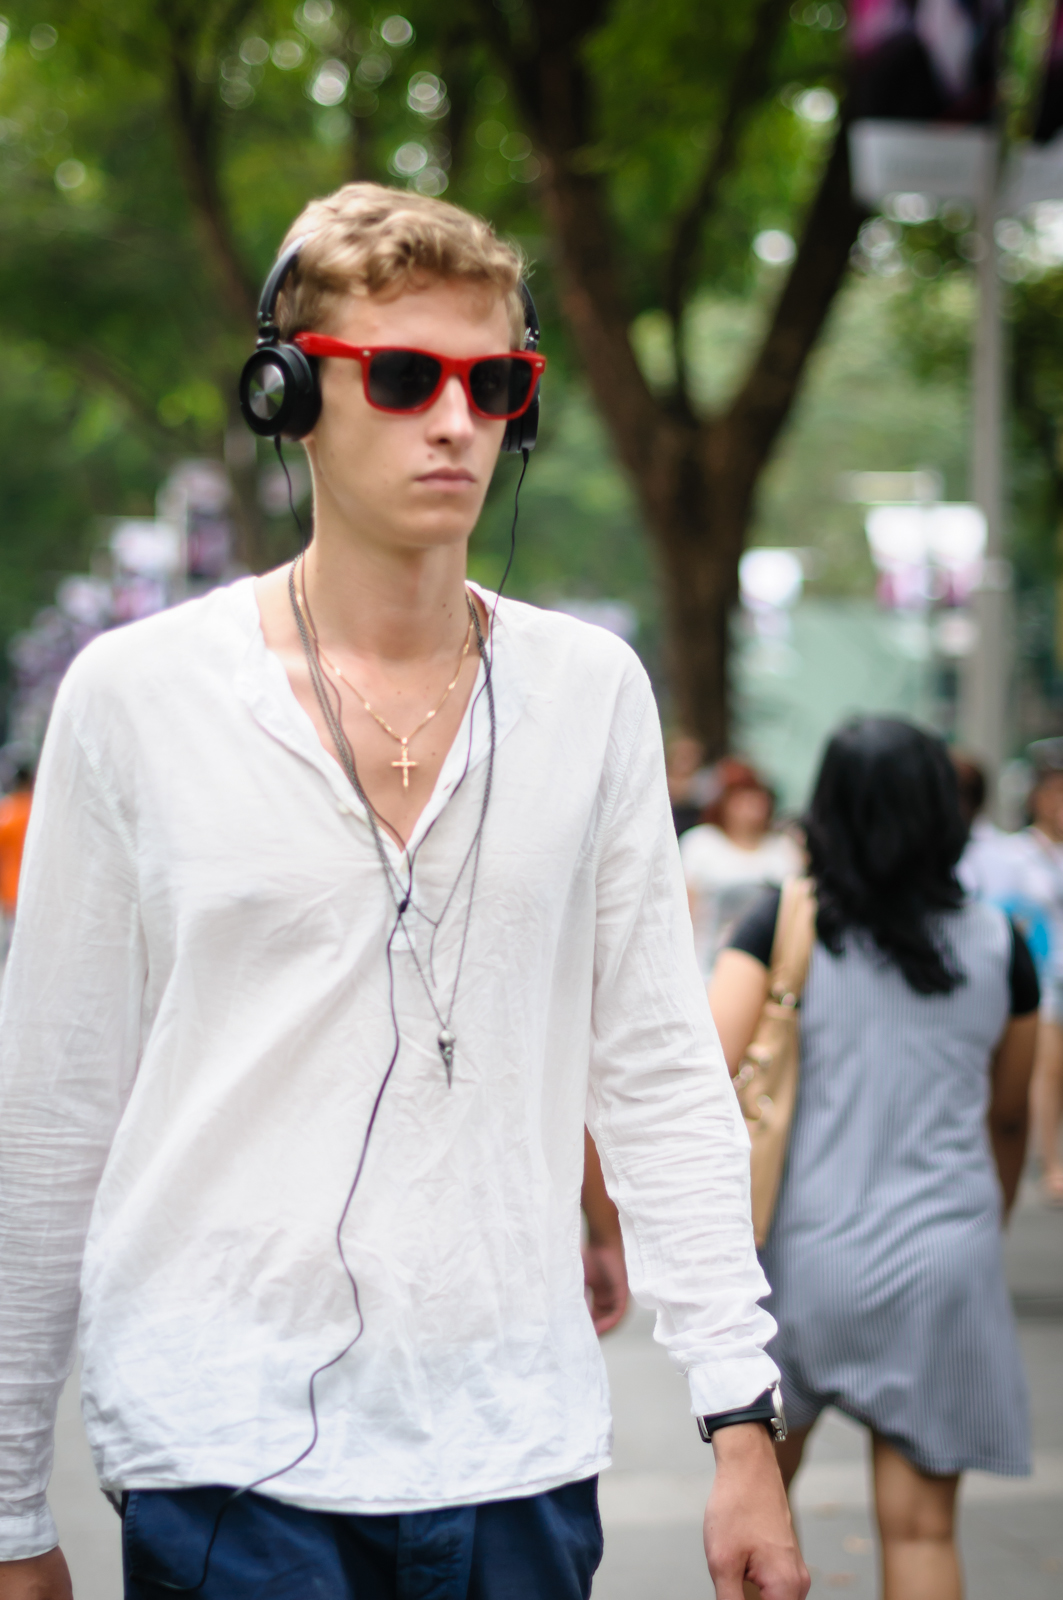 Street photography - tall man wearing shades and headphones